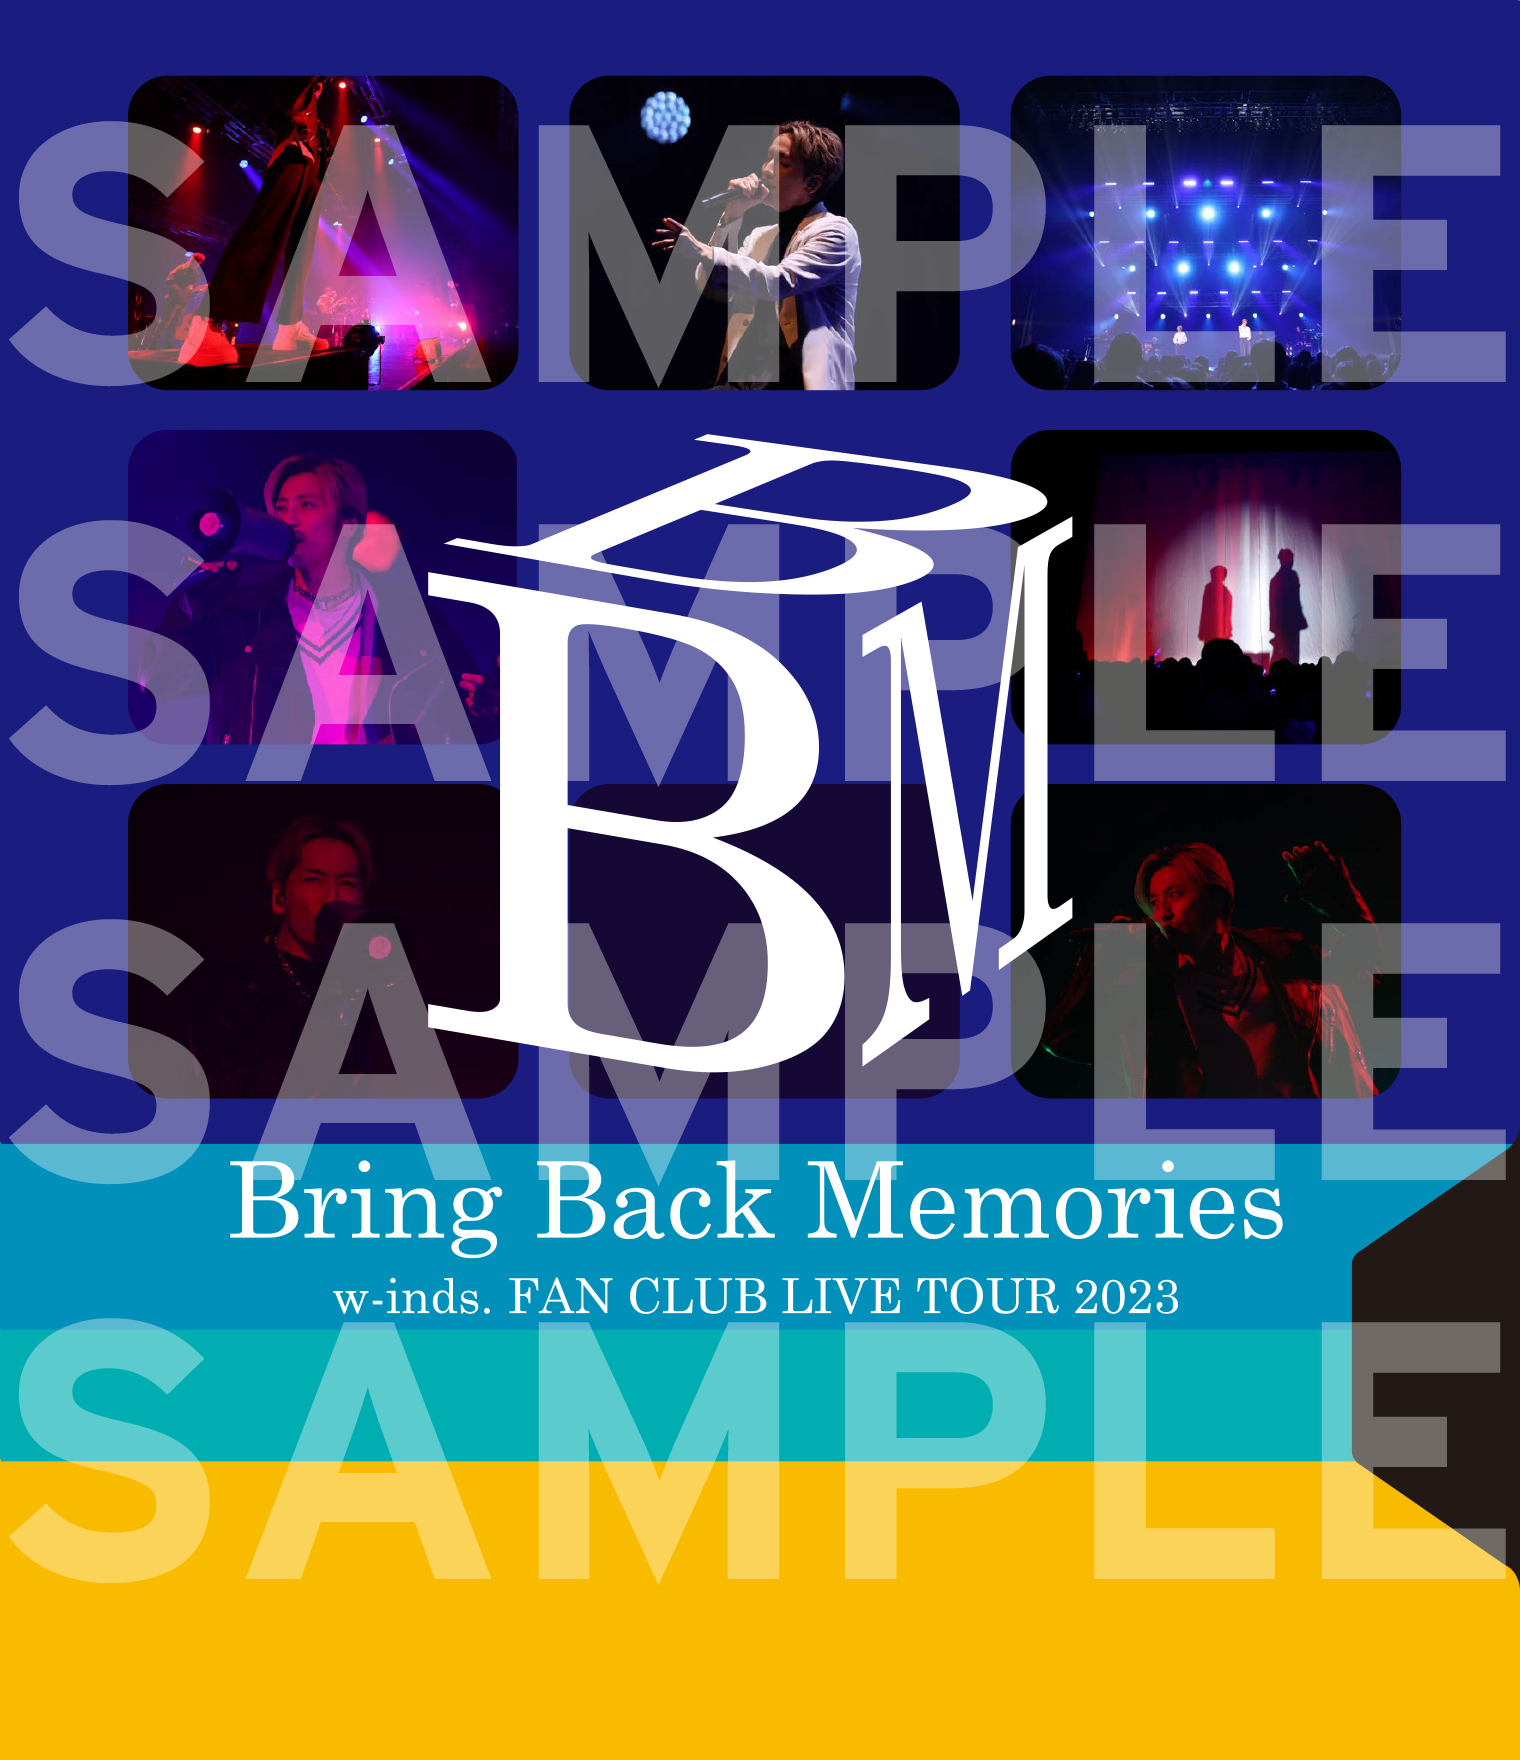 BACK TO THE MEMORIES BTTM Blu-ray - ミュージック